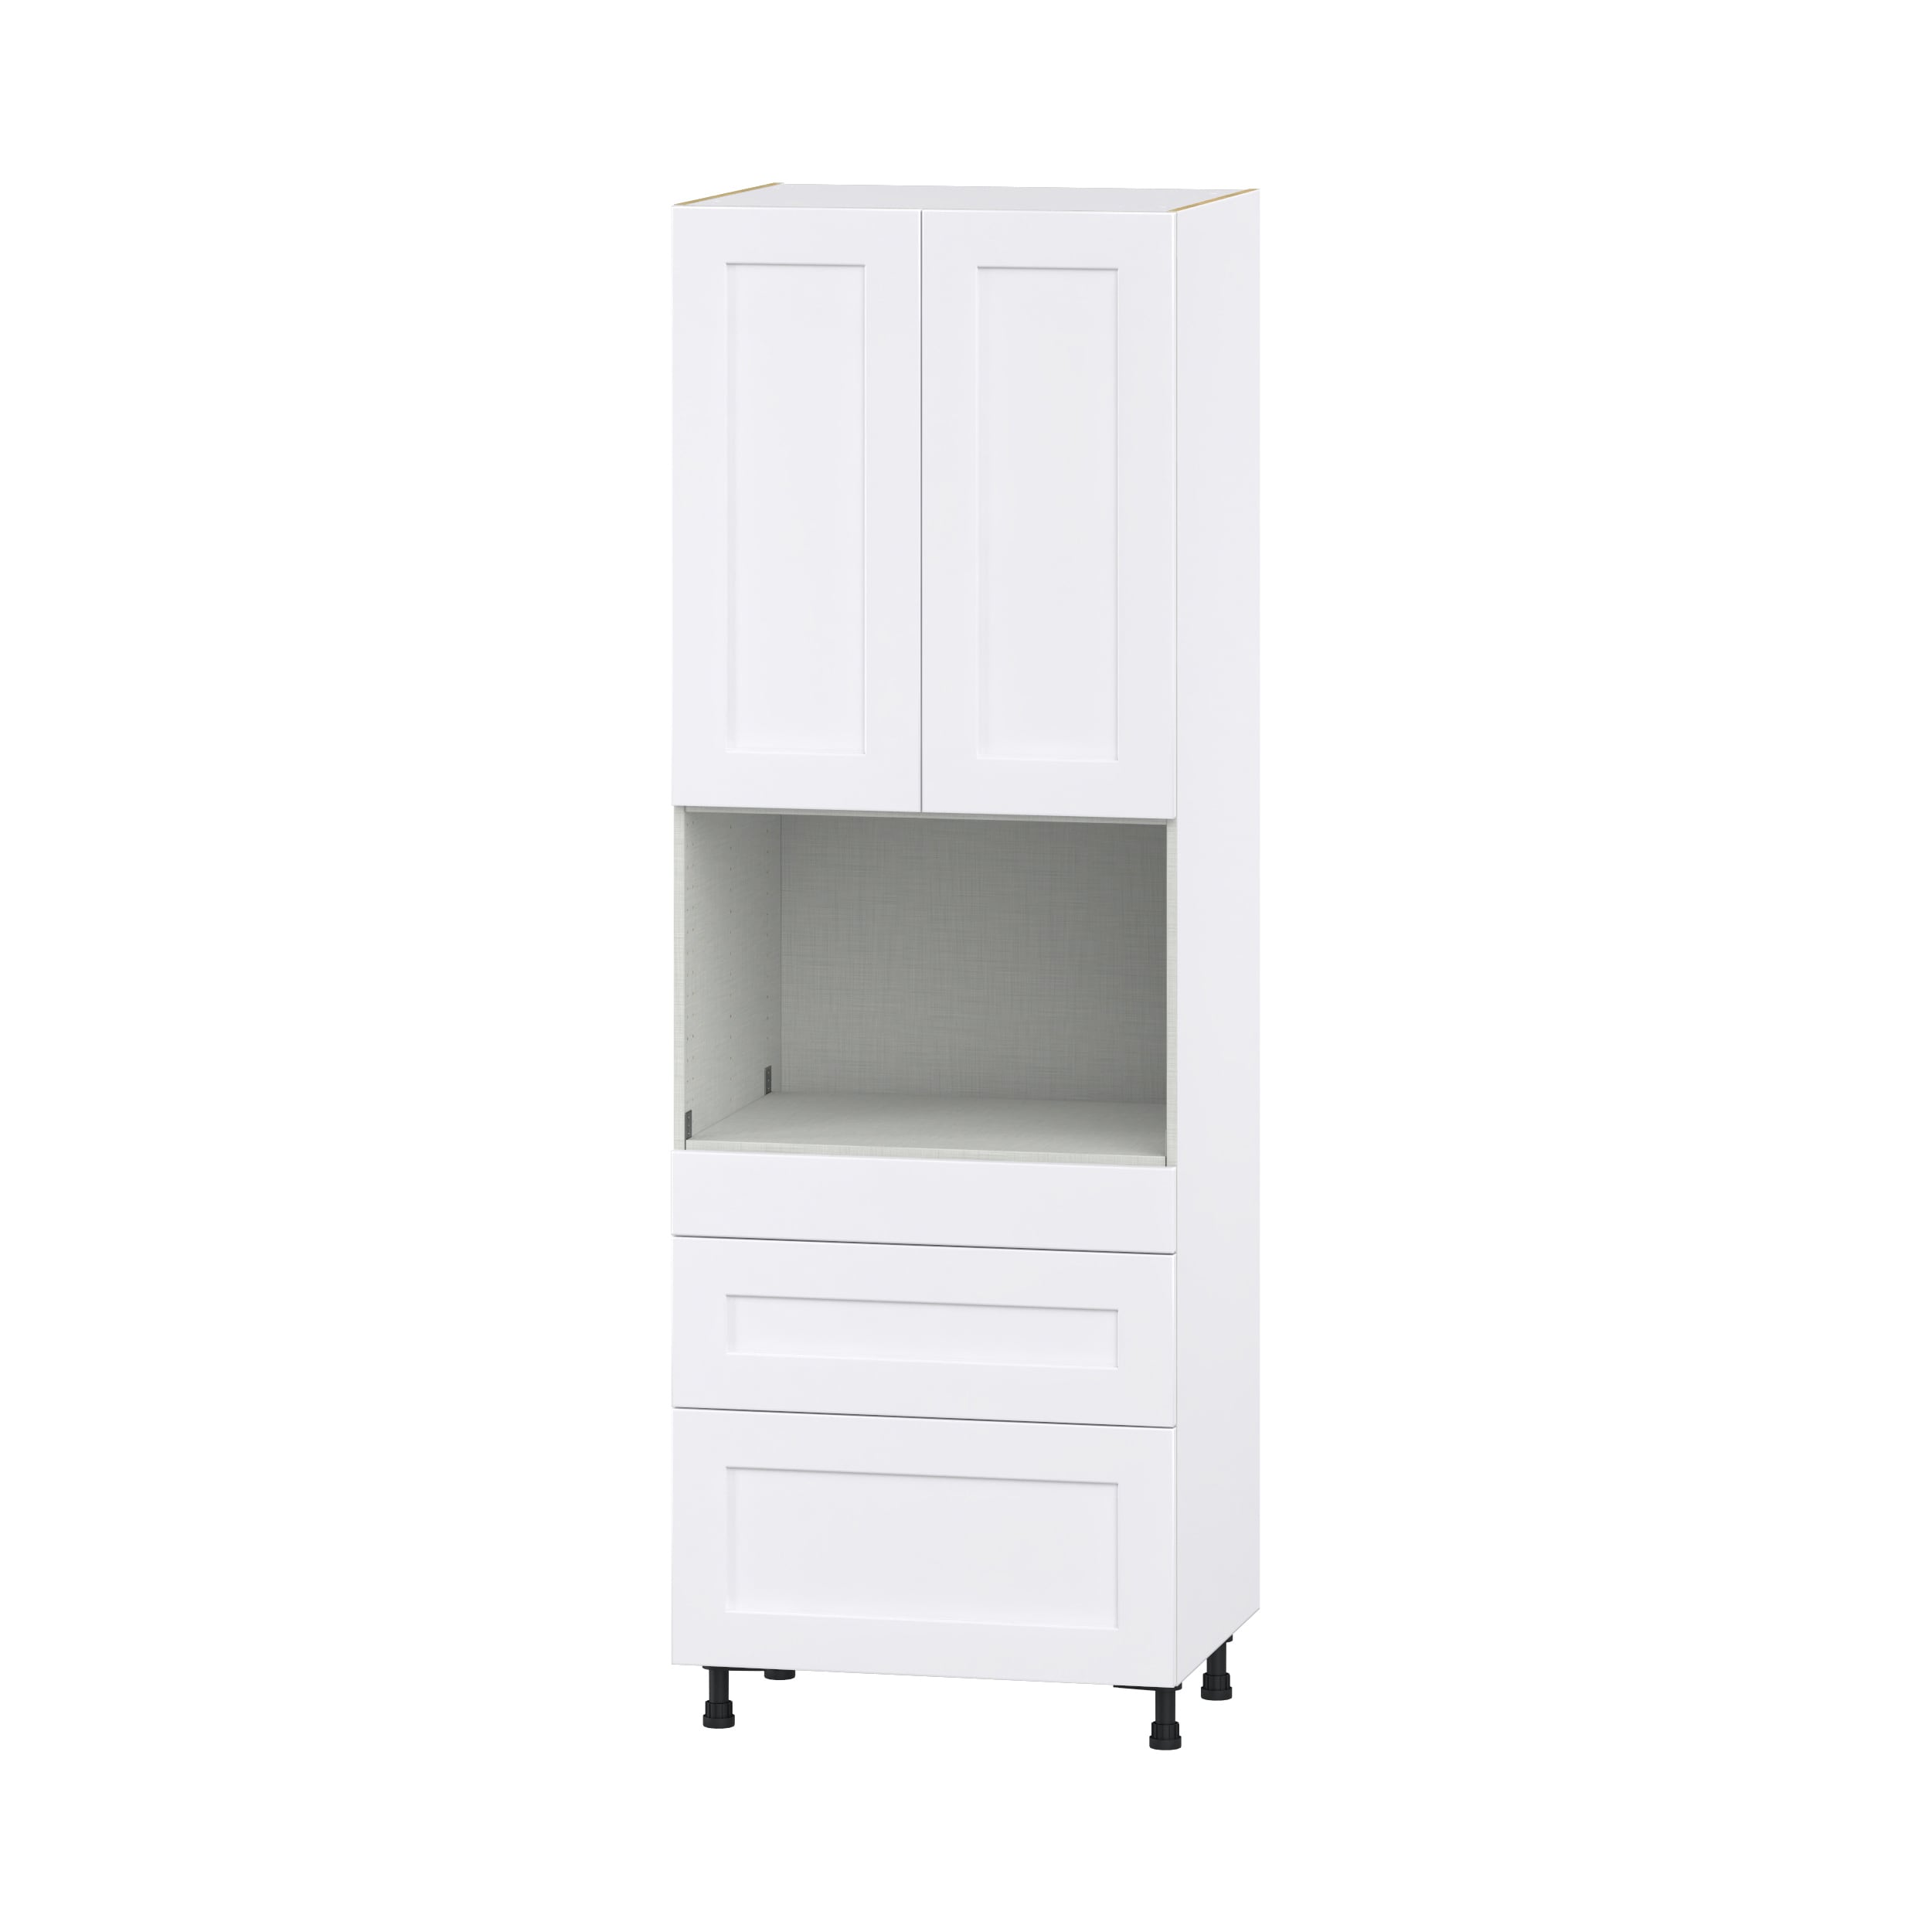 Hugo&Borg Jolie 30-in W x 89.5-in H x 24-in D Warm White Door and ...